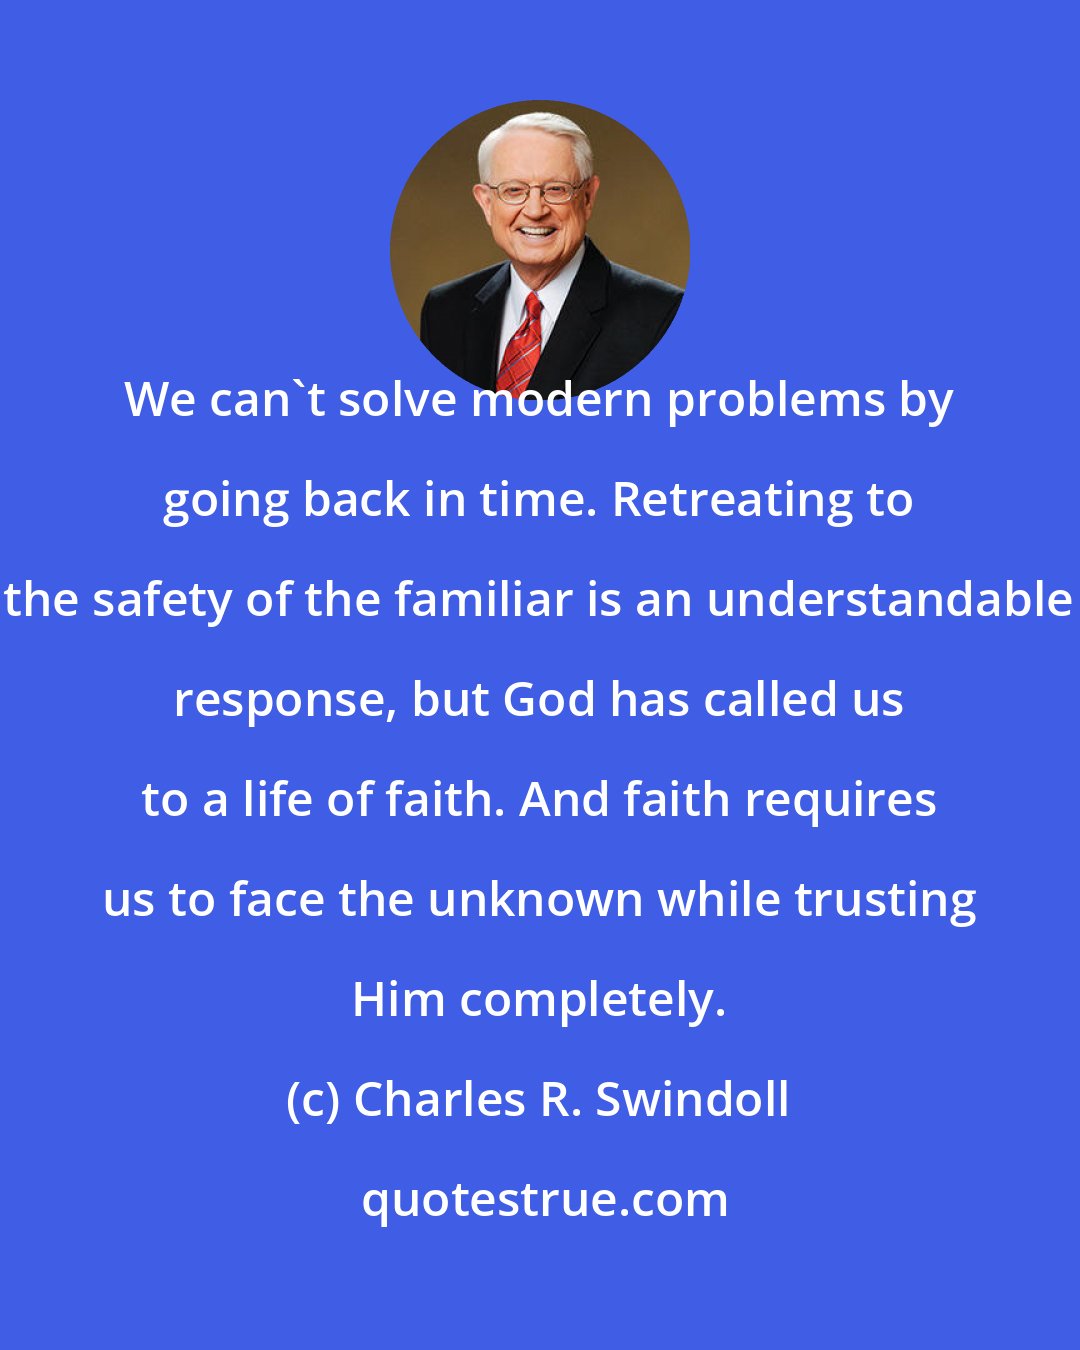 Charles R. Swindoll: We can't solve modern problems by going back in time. Retreating to the safety of the familiar is an understandable response, but God has called us to a life of faith. And faith requires us to face the unknown while trusting Him completely.